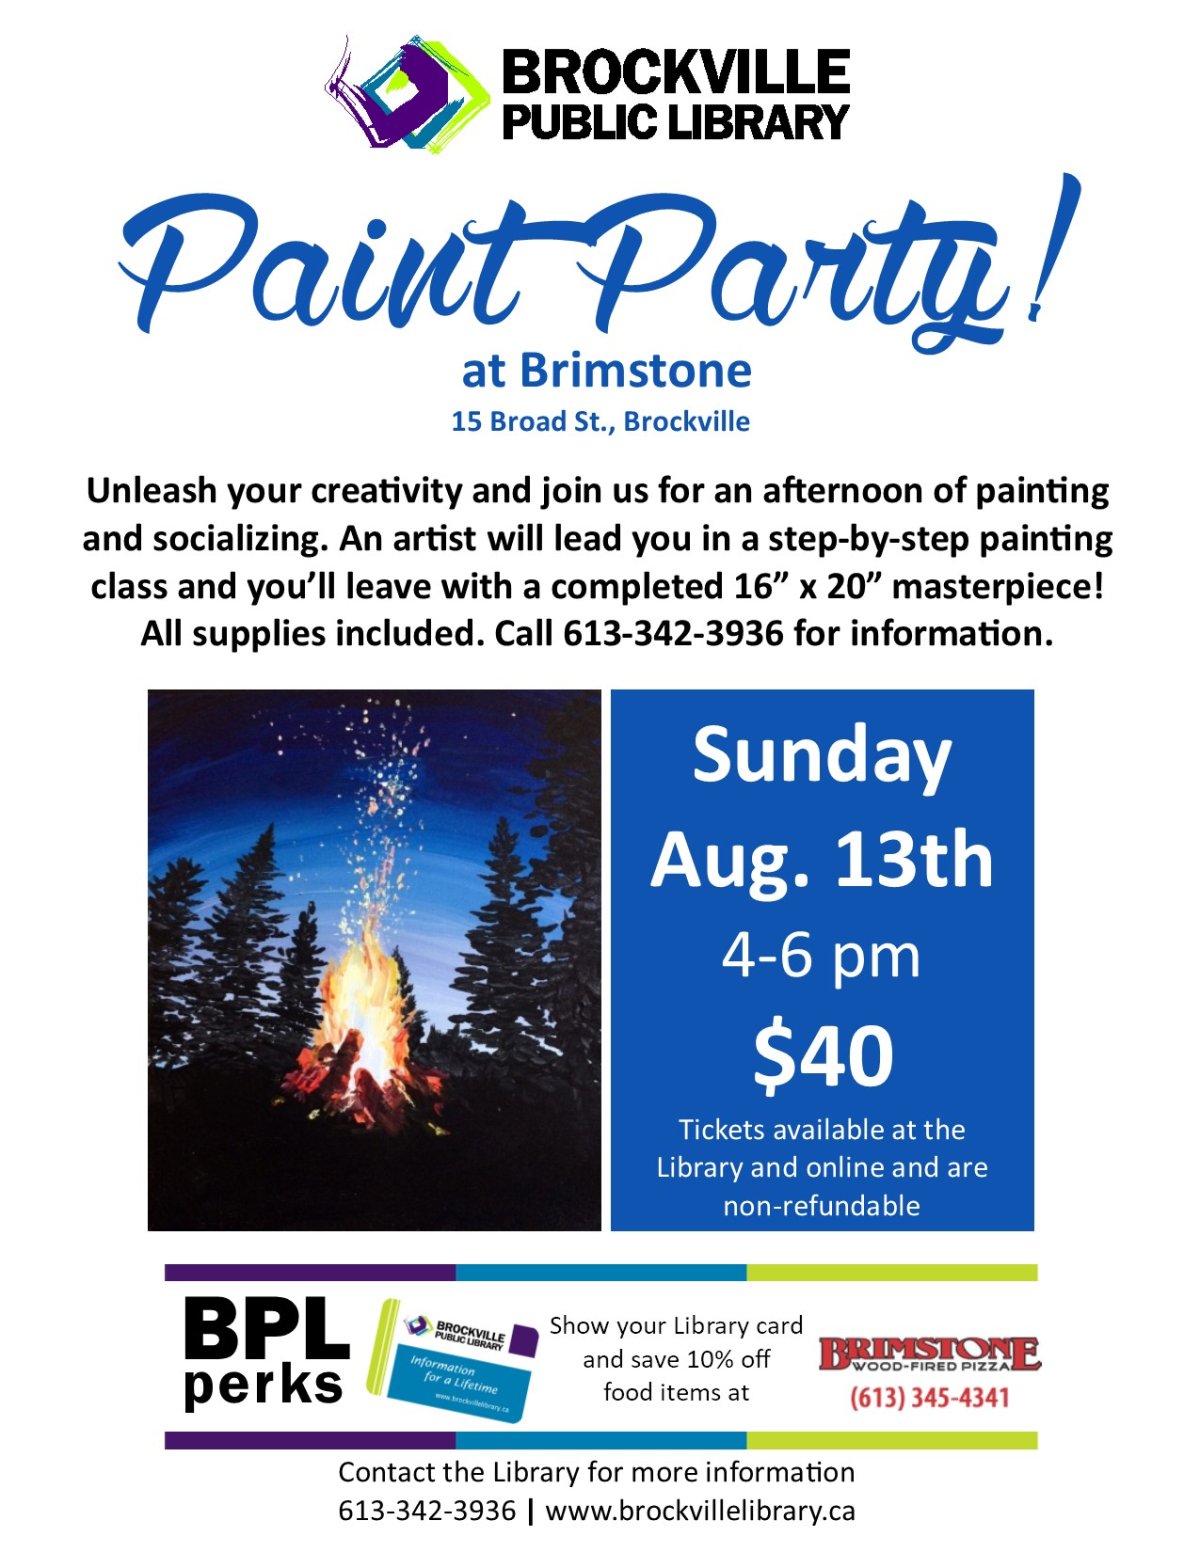 Paint Party Fundraiser for the Brockville Public Library - image